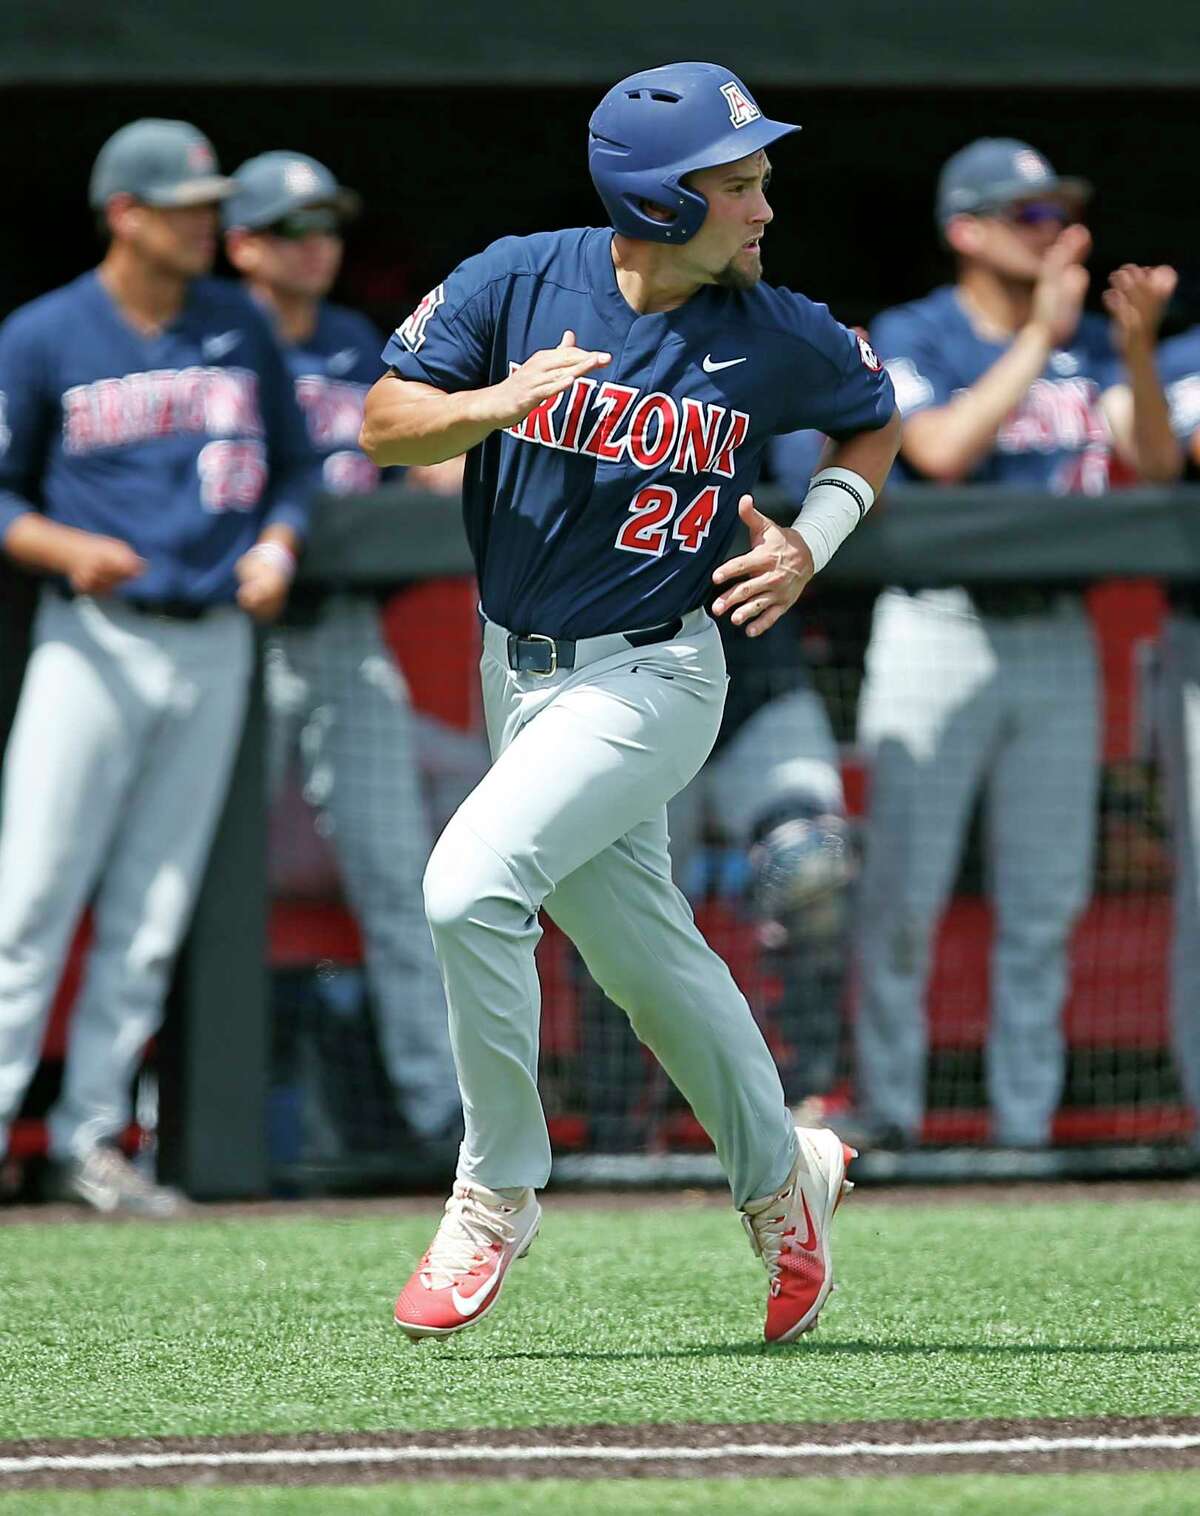 Arizona's JJ Matijevic (24) watches the ball land in center field while running to home plate during an NCAA college baseball regional game against Delaware, Saturday, June 3, 2017, in Lubbock, Texas. (Brad Tollefson/Lubbock Avalanche-Journal via AP)